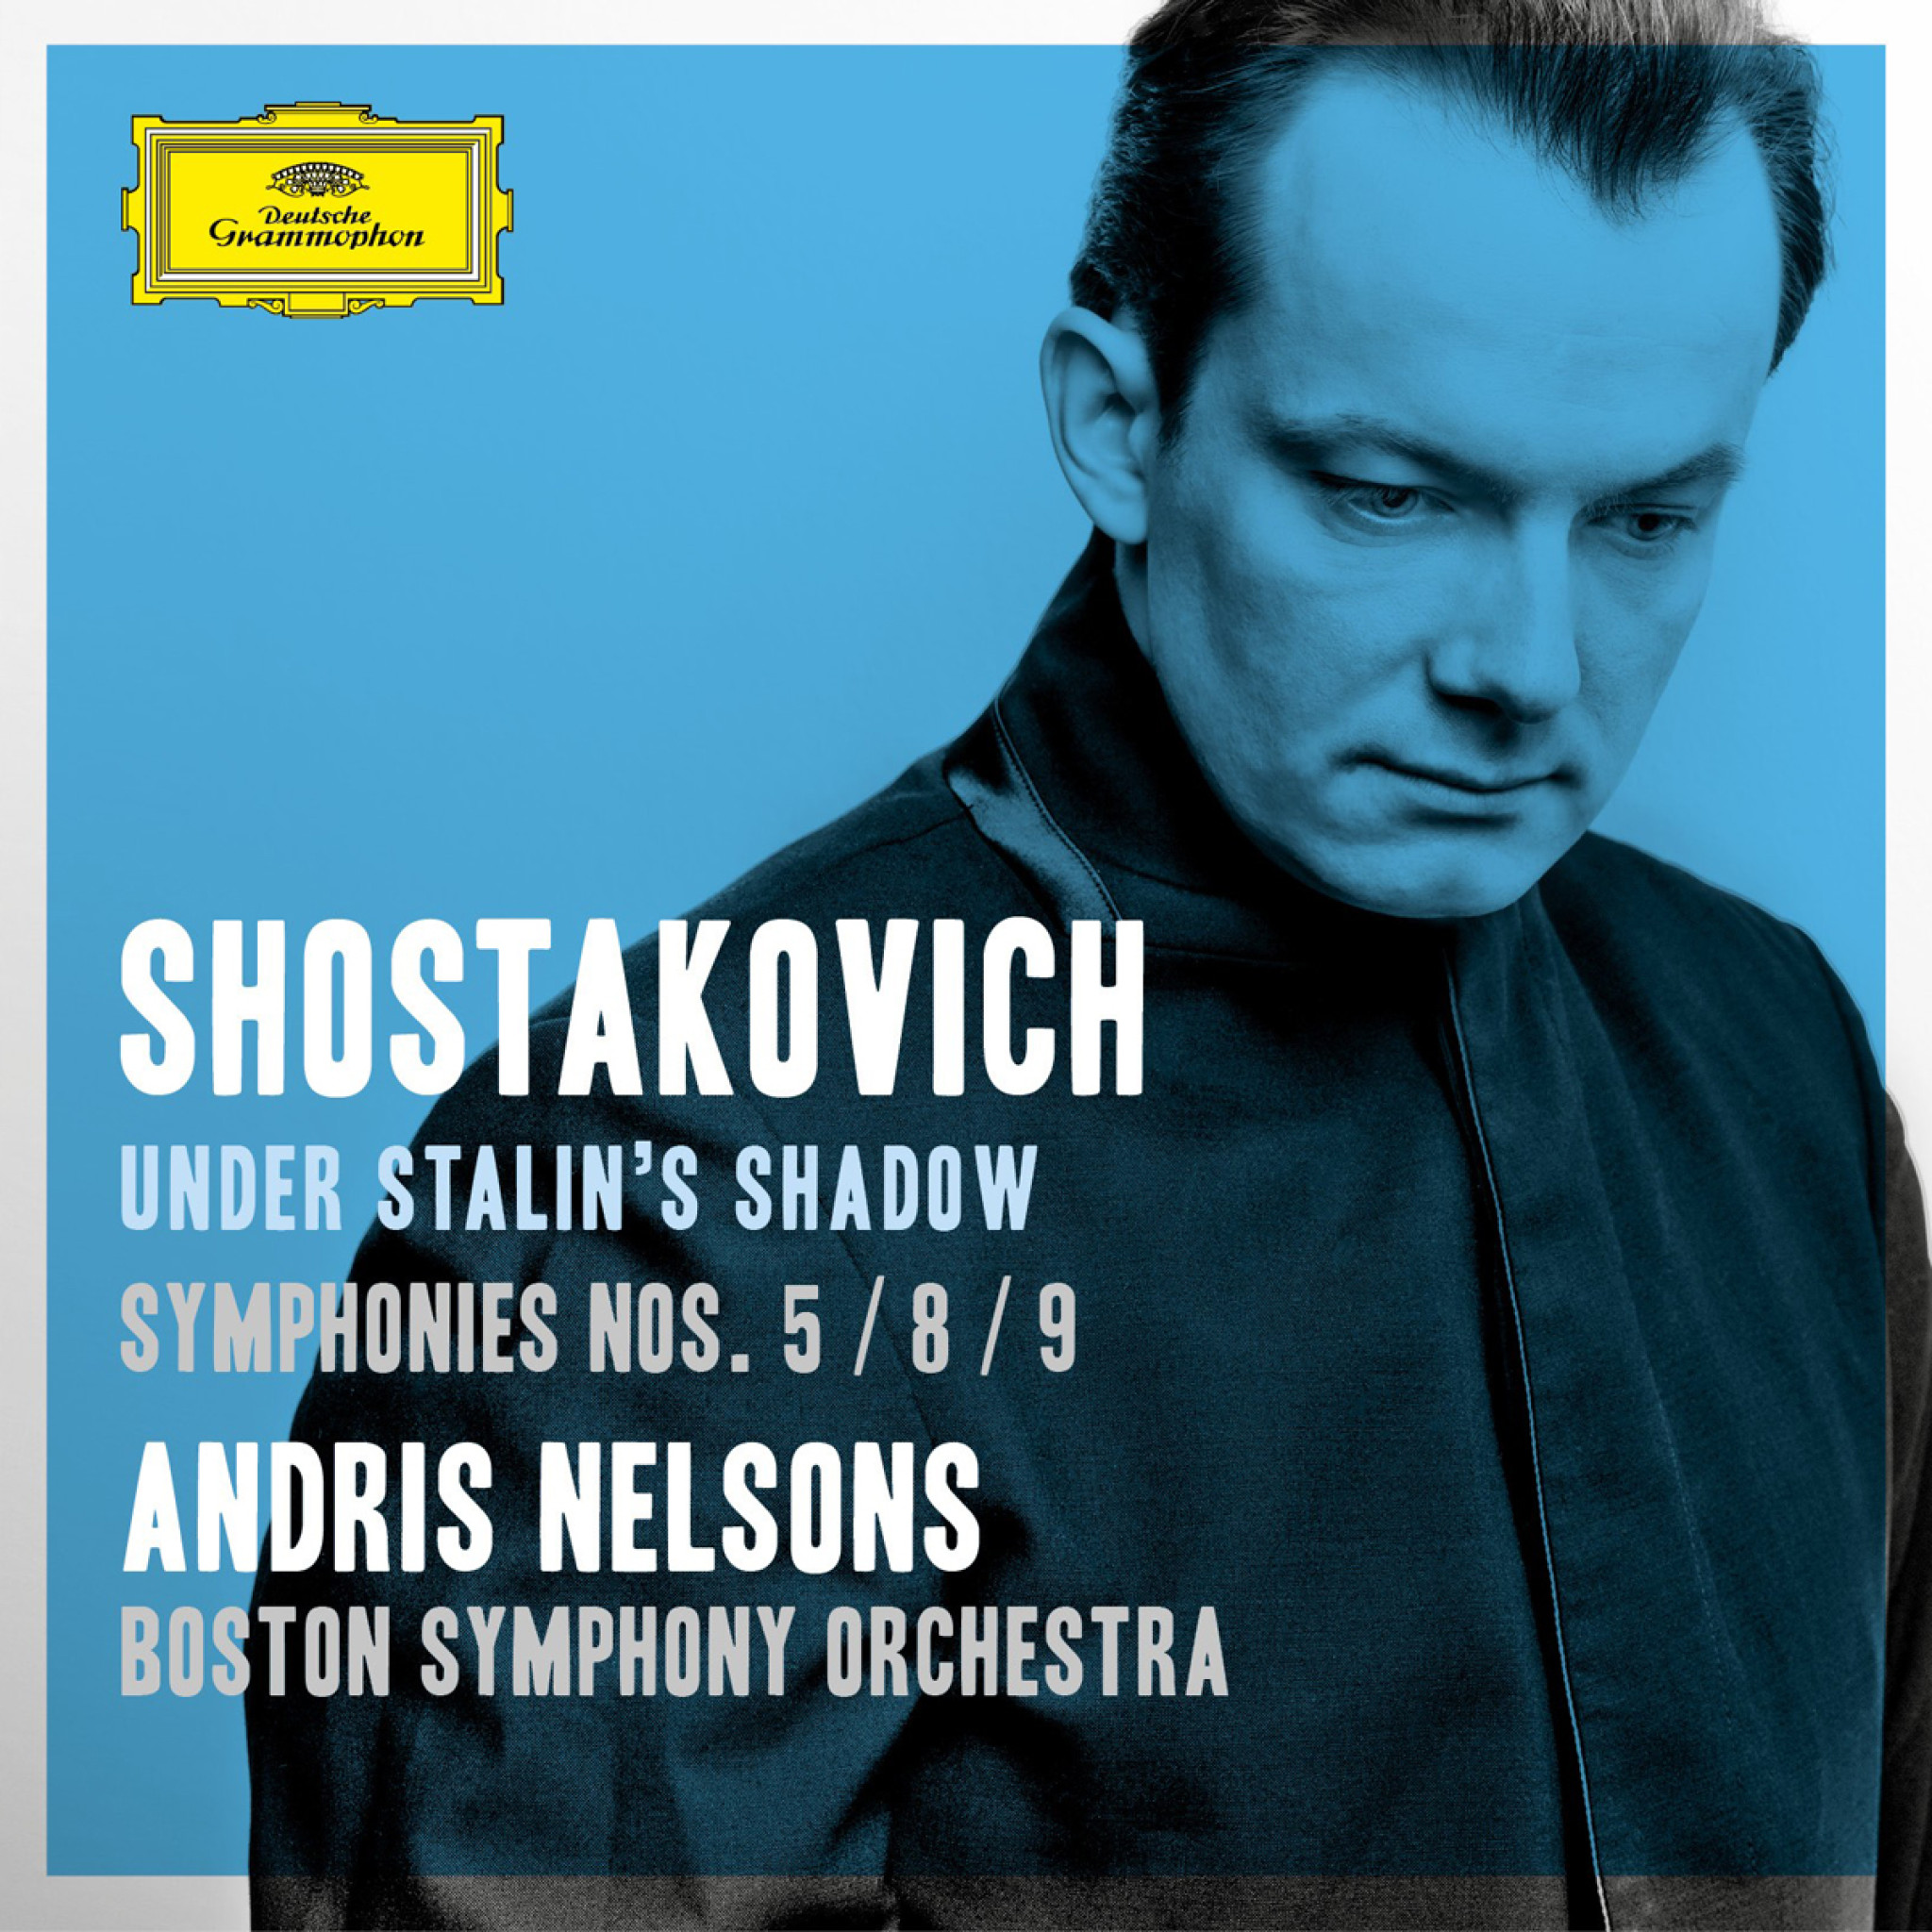 Andris Nelsons Shostakovich Under Stalin's Shadow: Symphonies Nos. 5/8/9